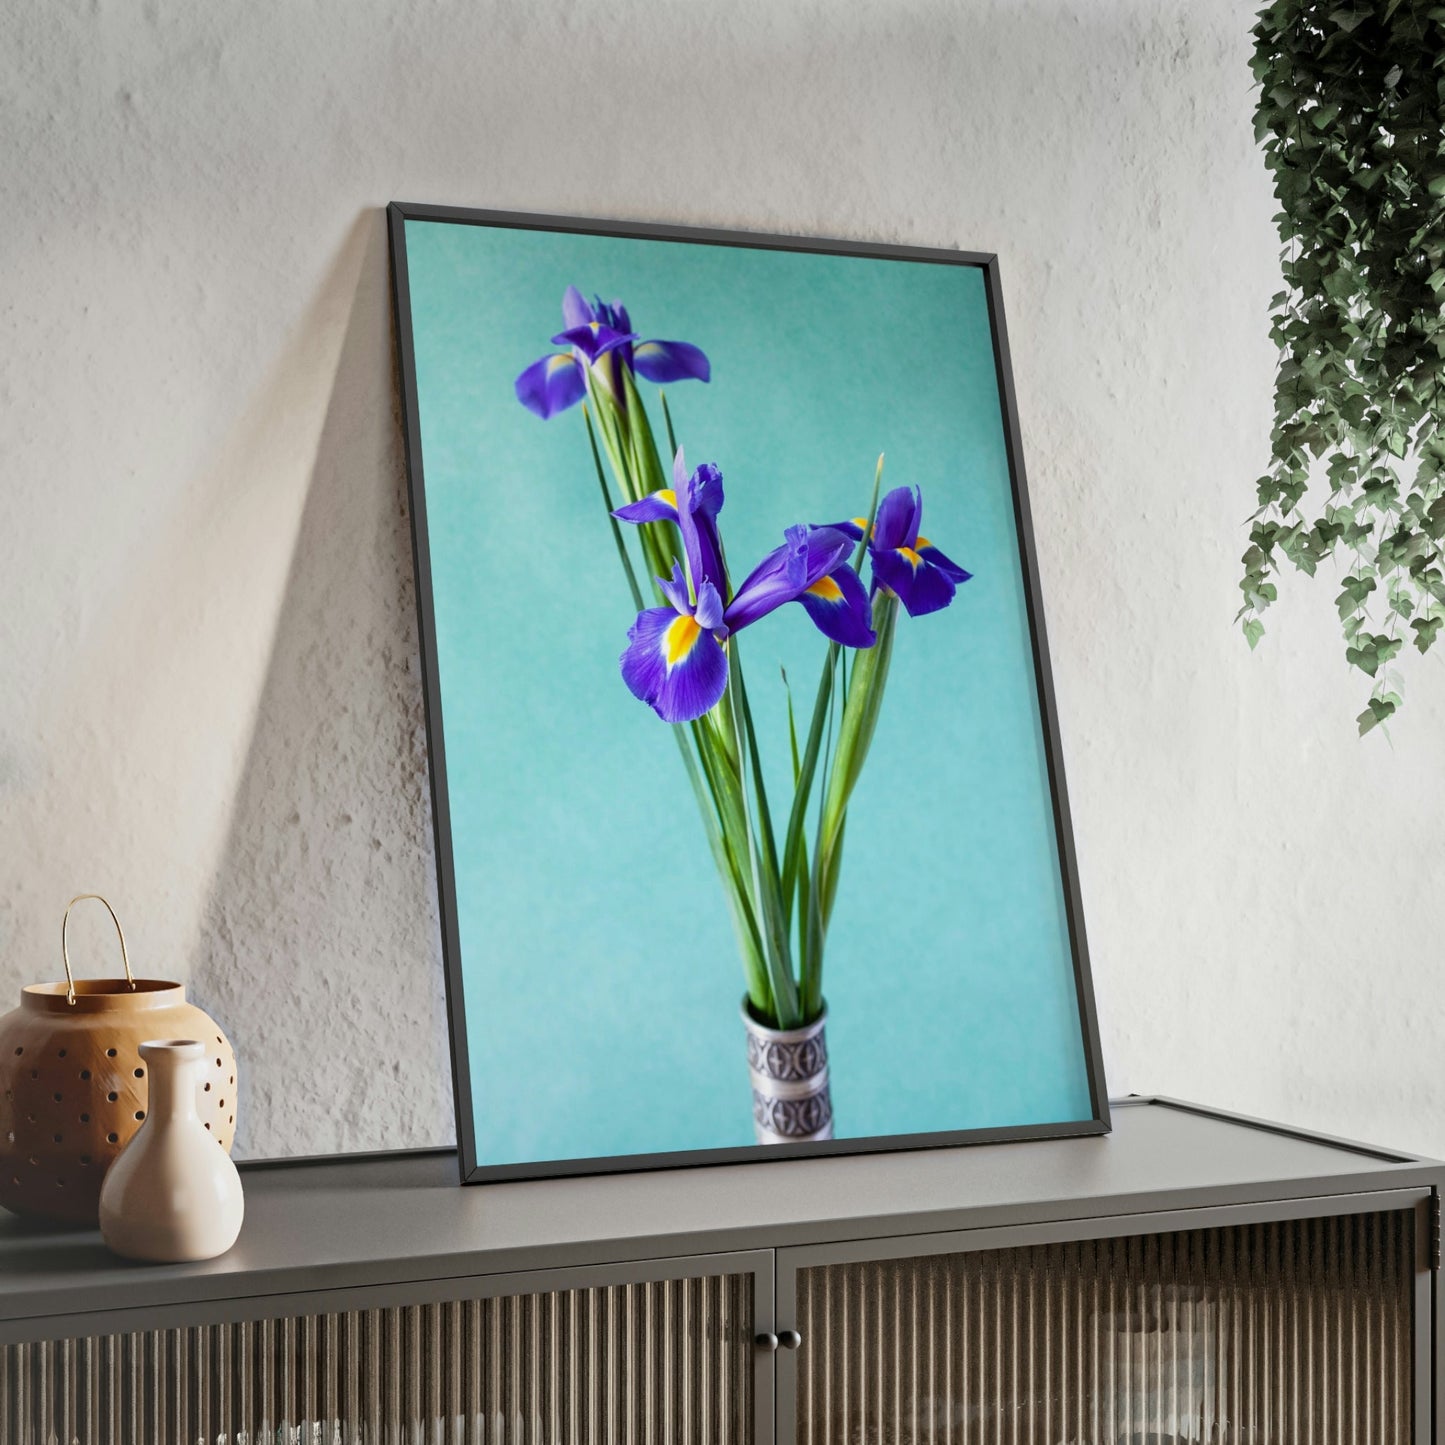 Iris Radiance: A Canvas of Bright and Bold Blossoms